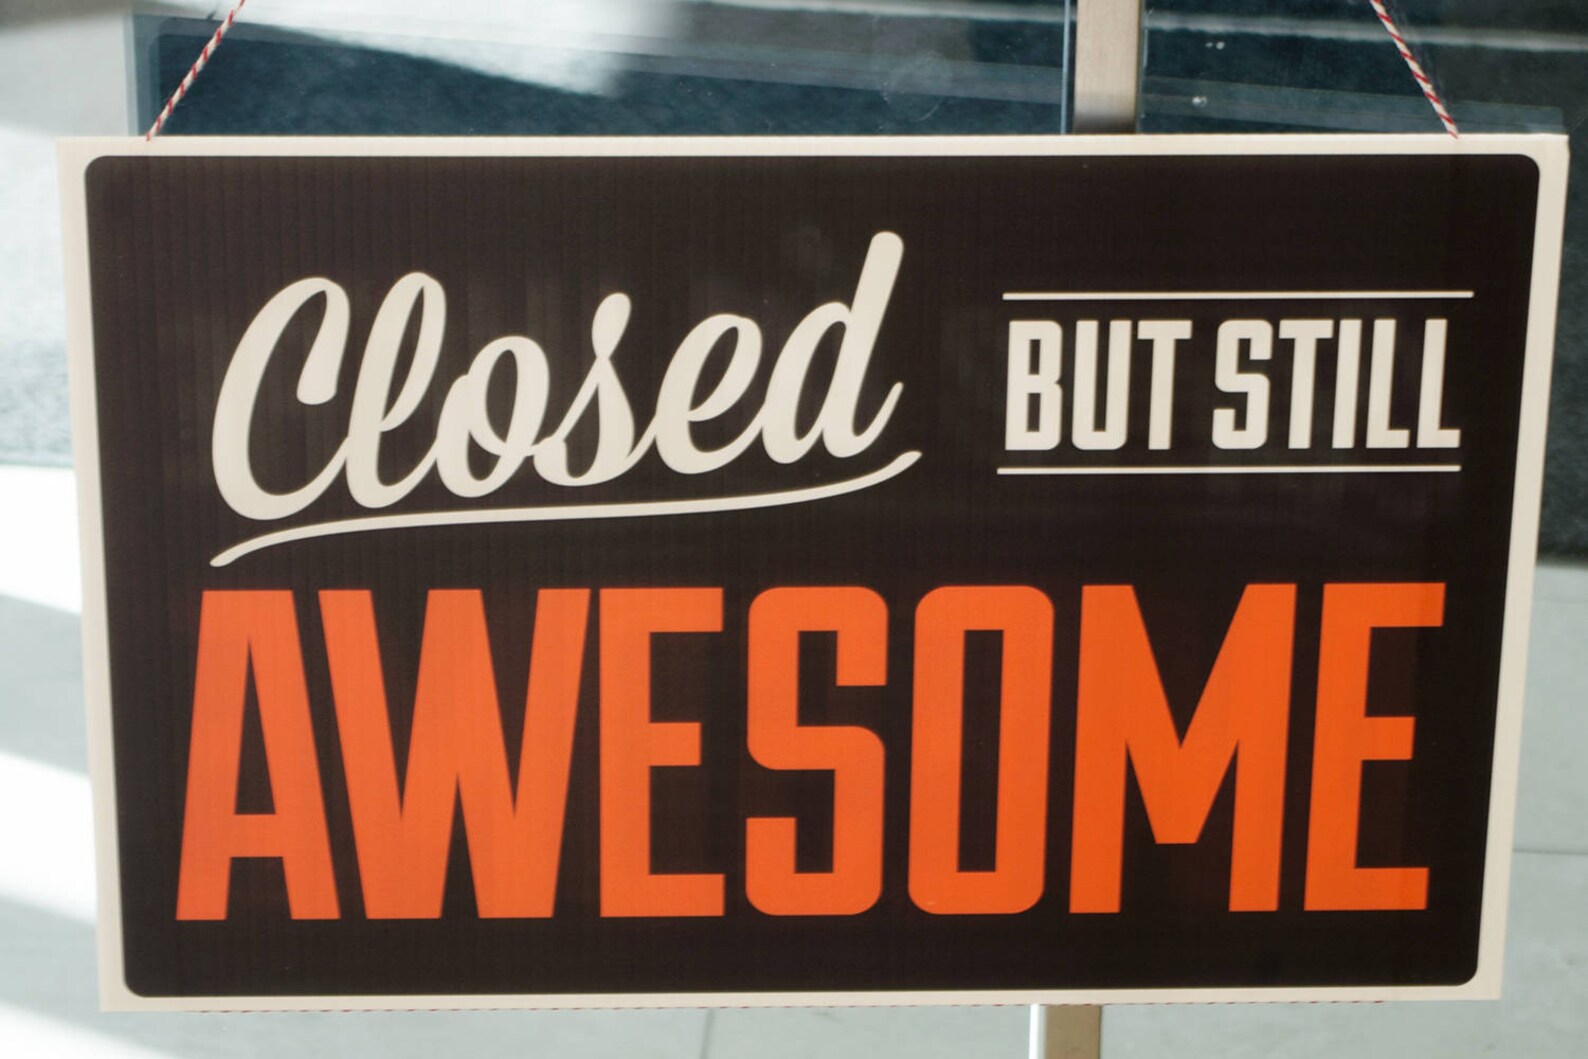 Come In We're Awesome ©™ : Closed But Still Awesome © Sign | Etsy